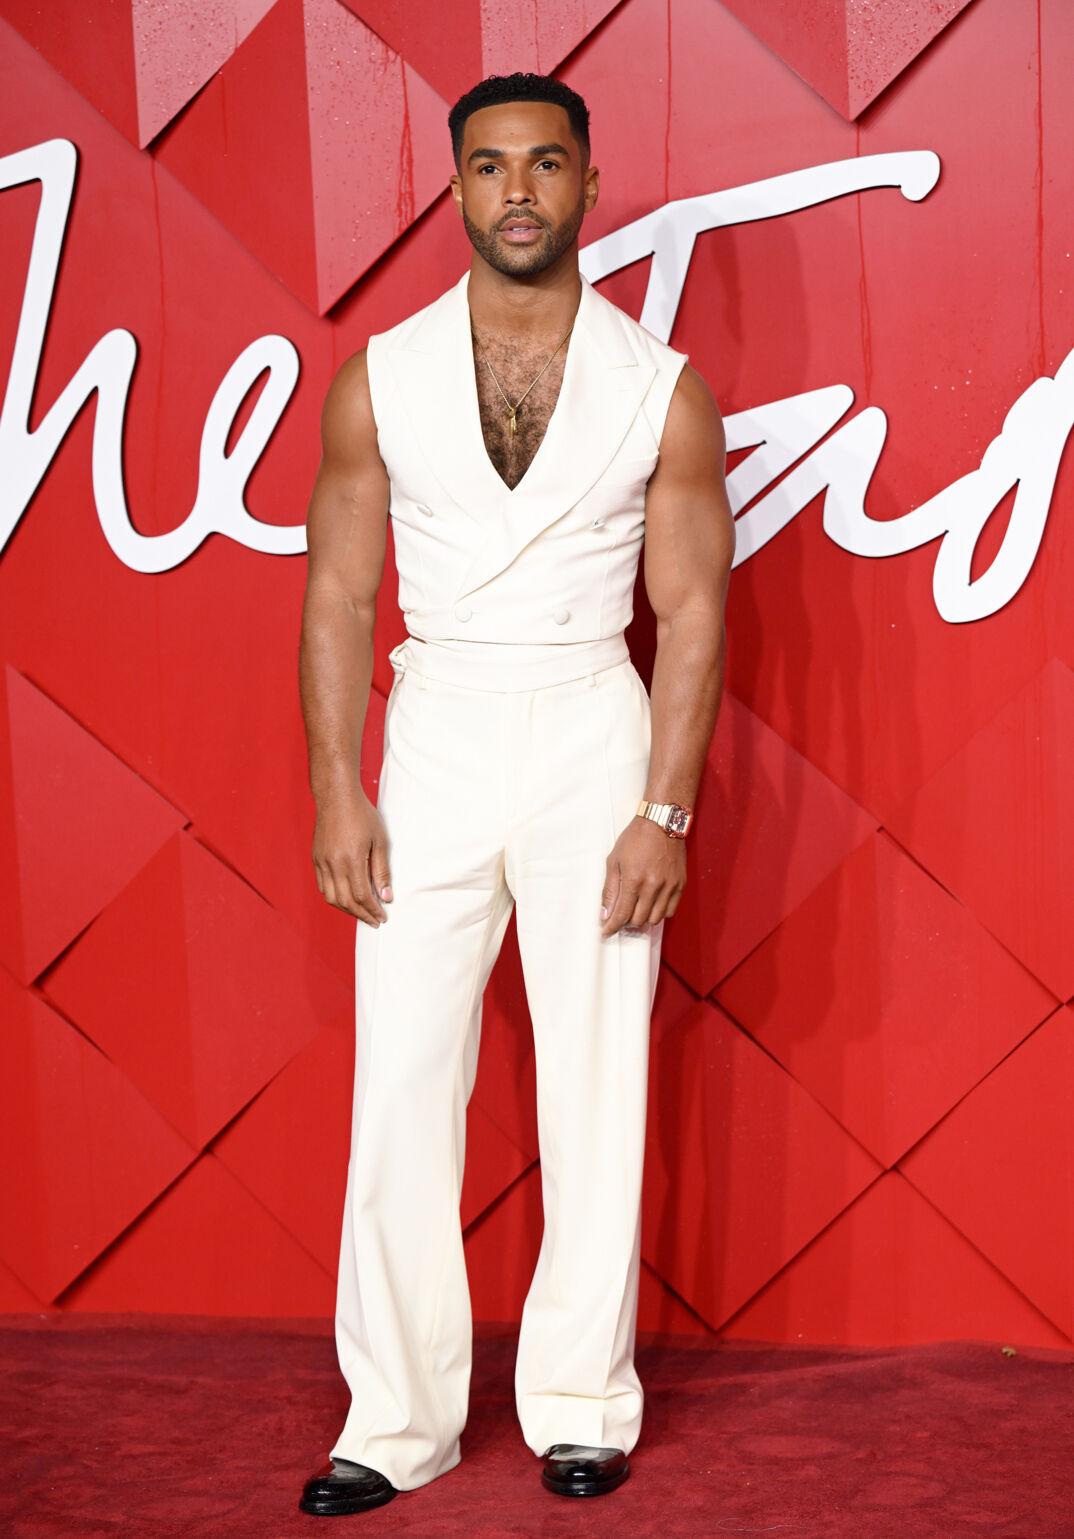  Lucien Laviscount in white sleeveless top